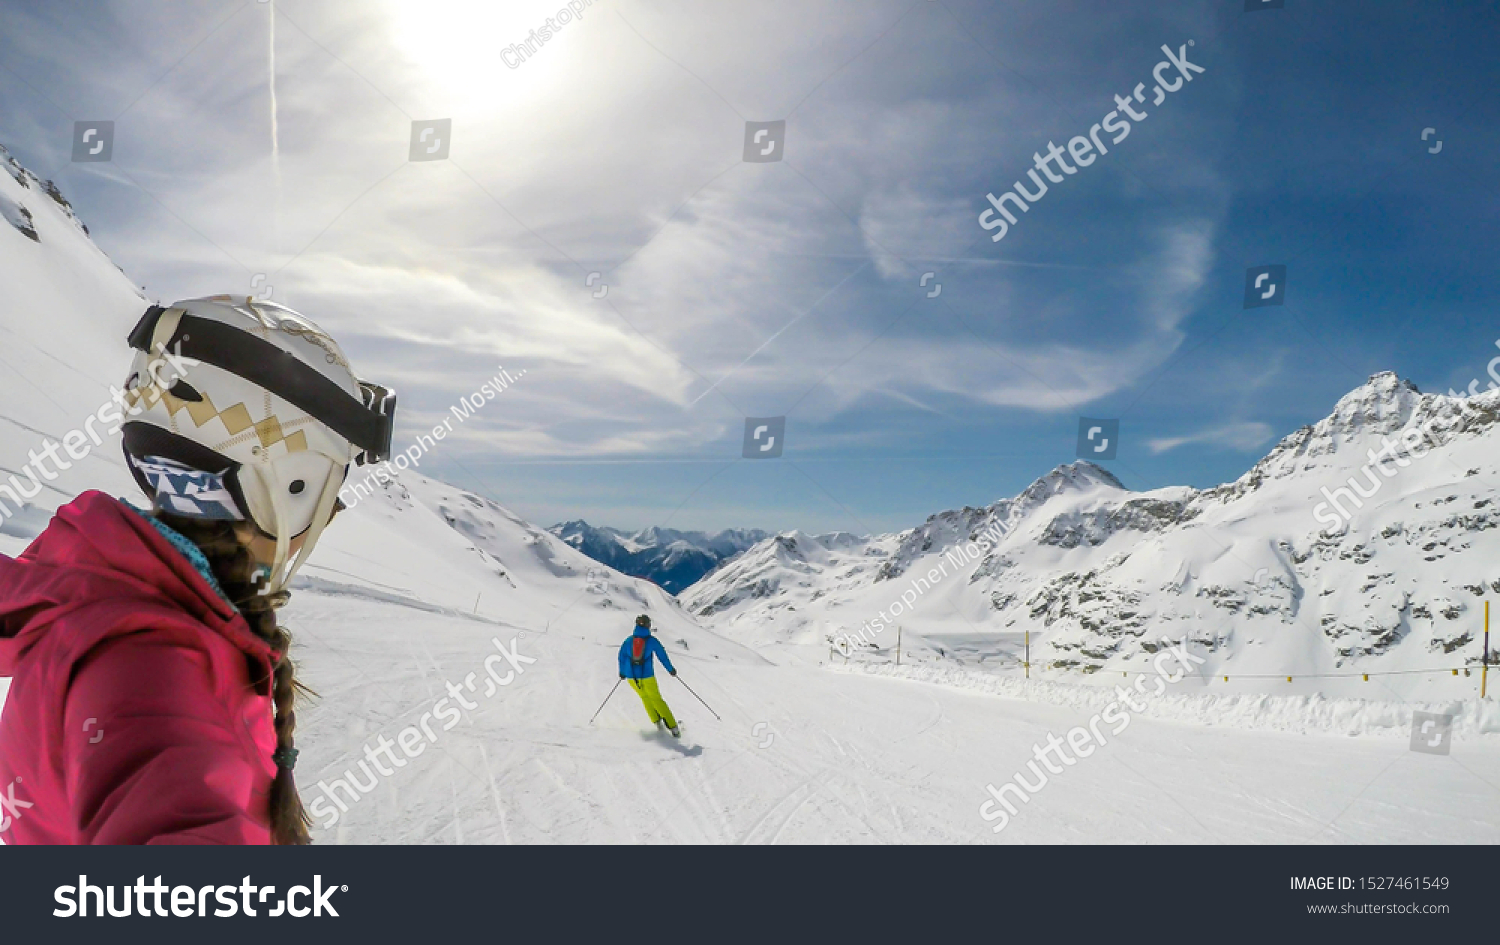 A snowboarding girl and skiing man going down the slope in Mölltaler Gletscher, Austria. Perfectly groomed slopes. High mountains surrounding the couple. They wear helm for the protection. Active life #1527461549